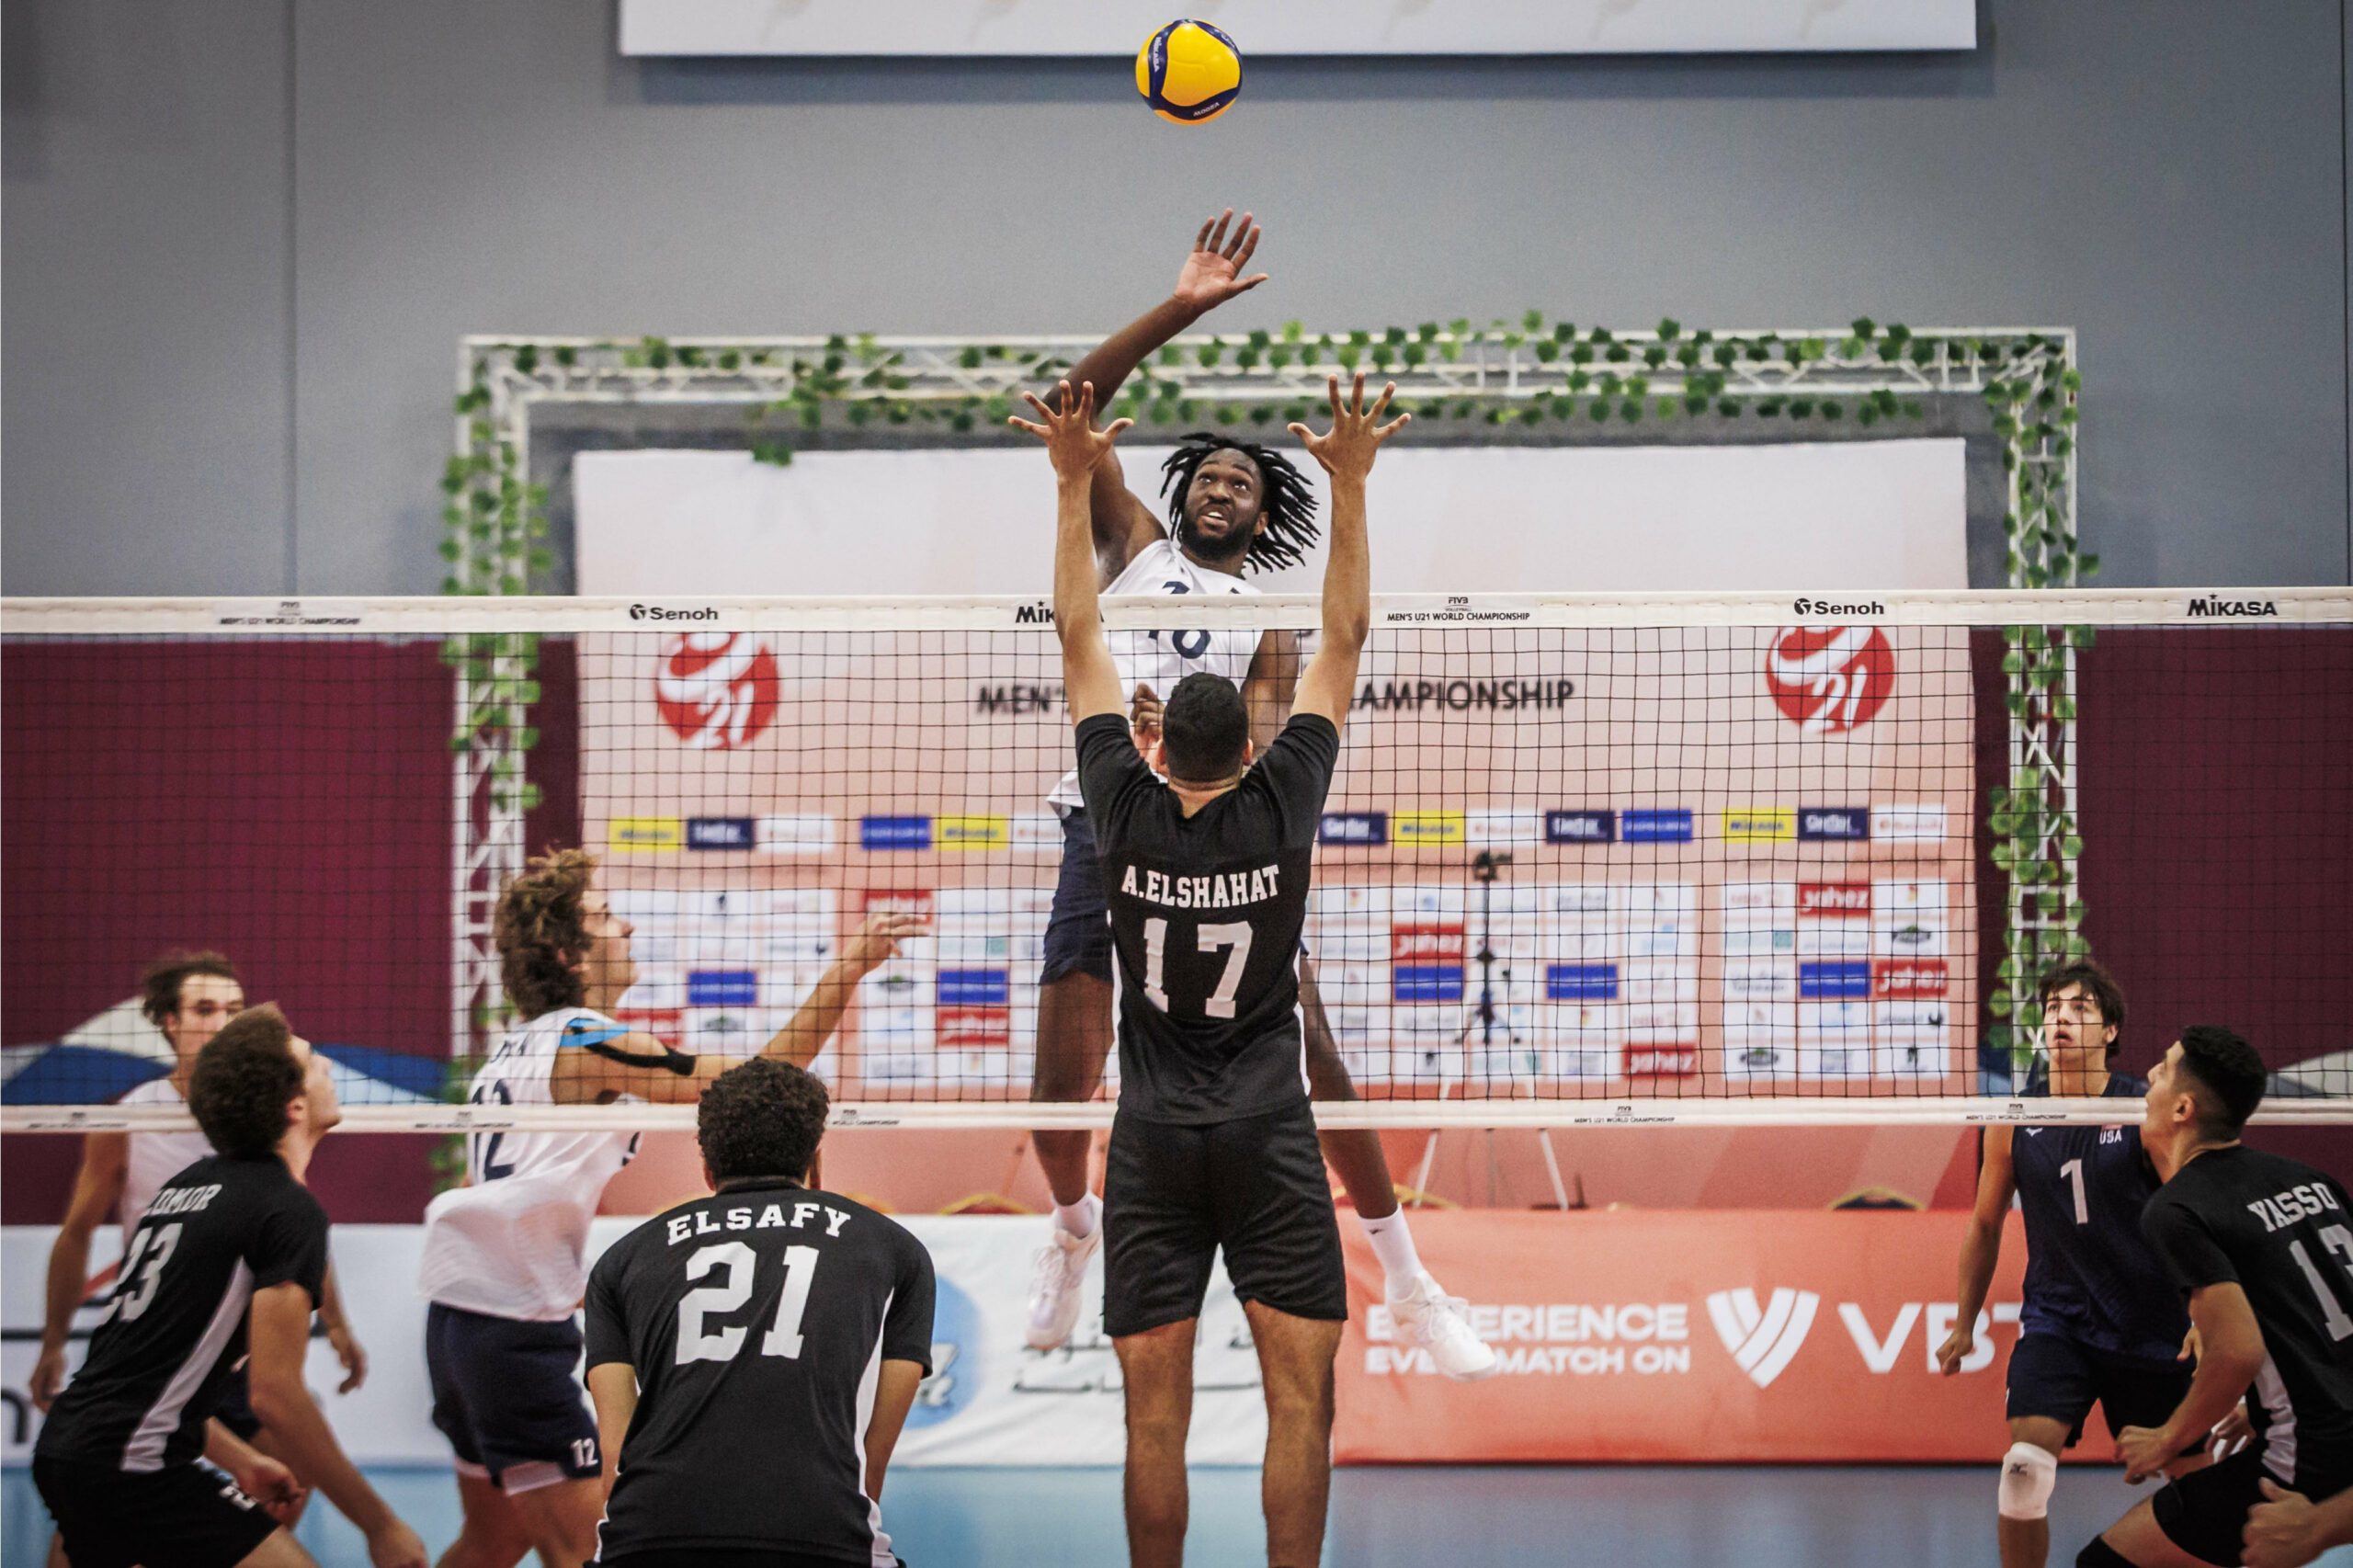 Nyherowo Omene with a kill against Egypt.